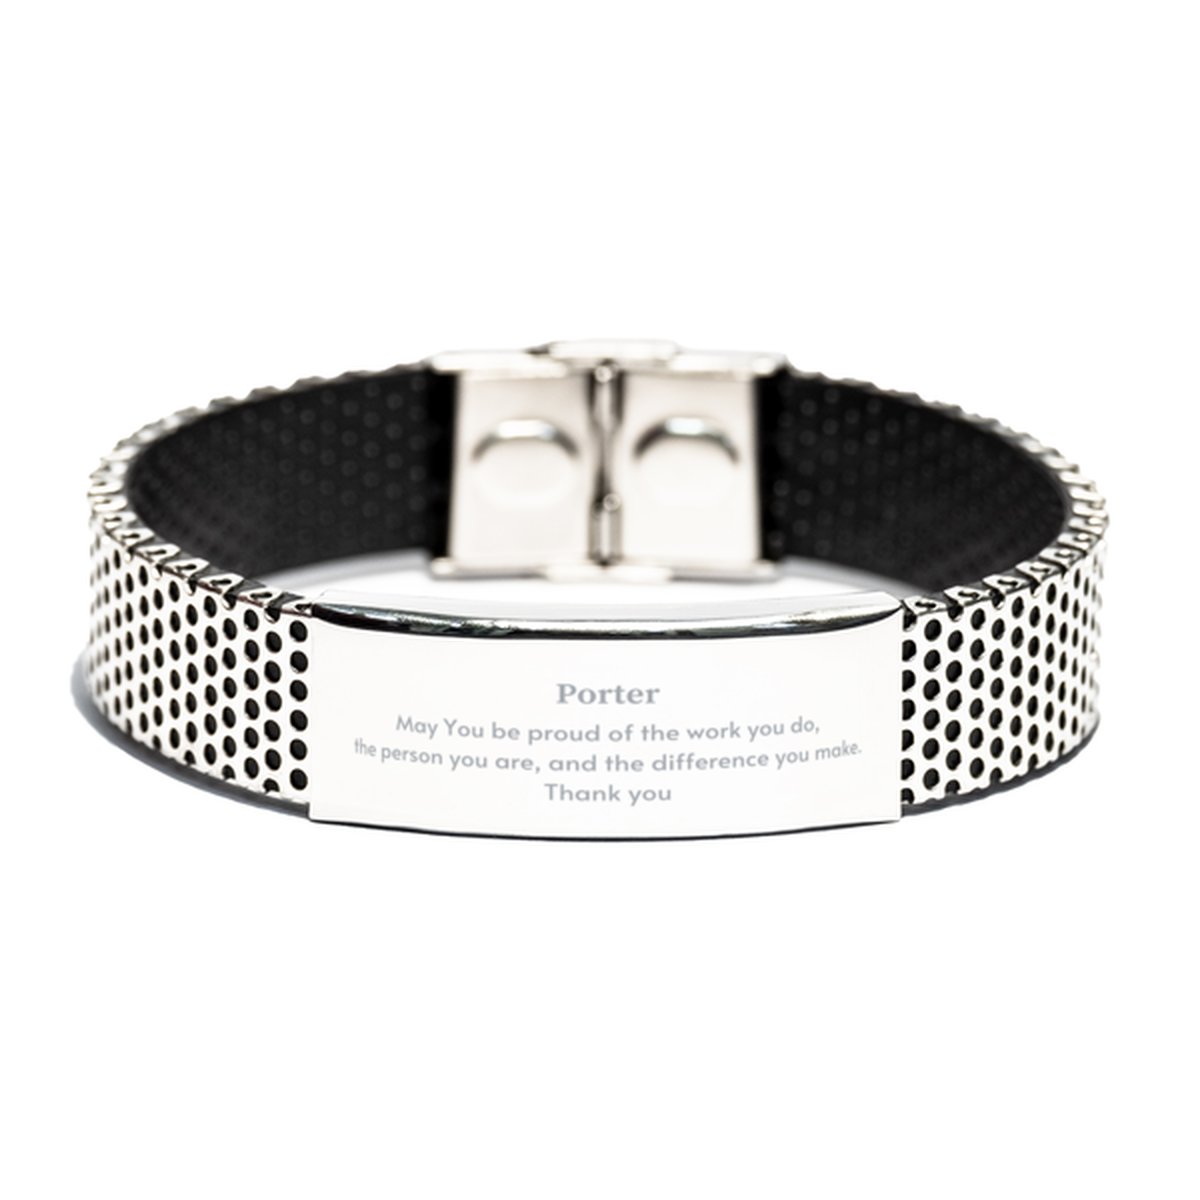 Heartwarming Stainless Steel Bracelet Retirement Coworkers Gifts for Porter, Porter May You be proud of the work you do, the person you are Gifts for Boss Men Women Friends